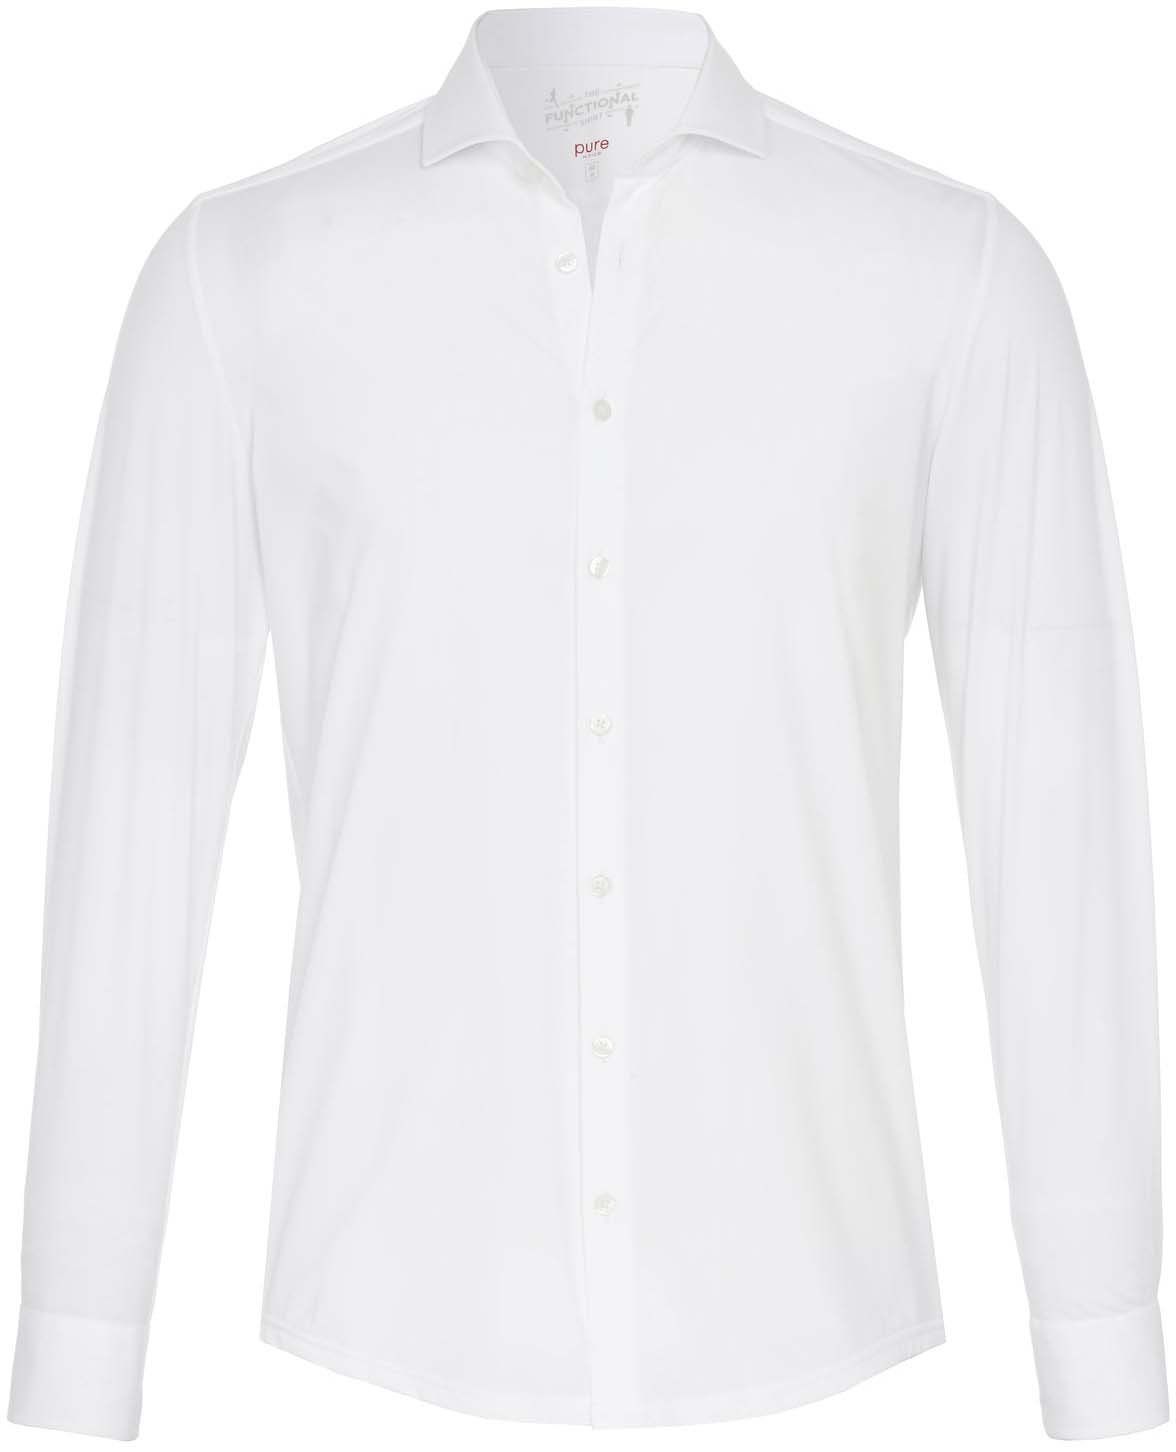 Pure H.Tico The Functional Shirt White size 15